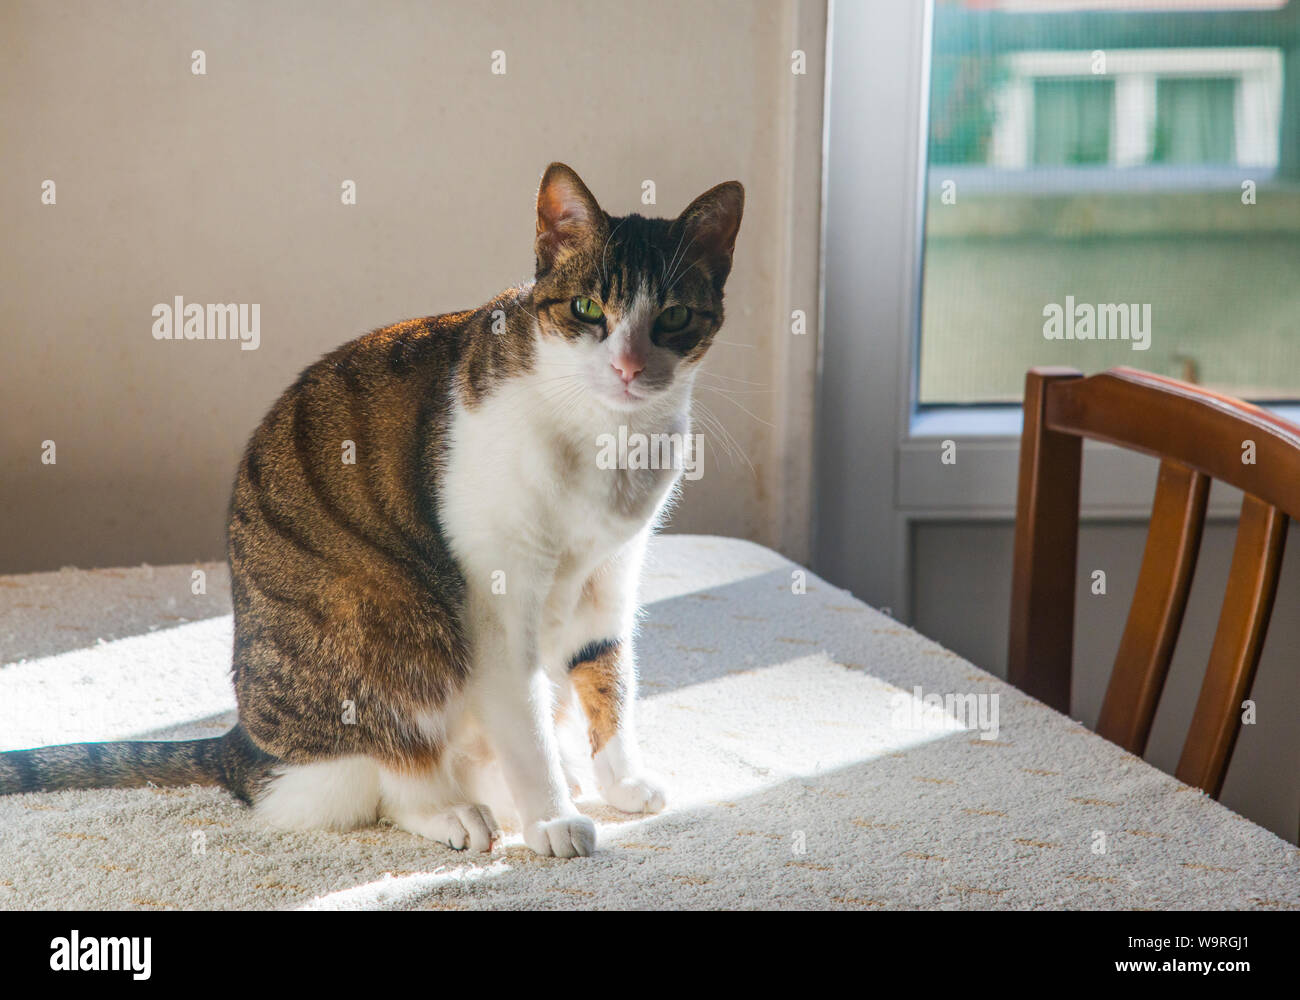 Tabby and white cat sitting on a table. Stock Photo